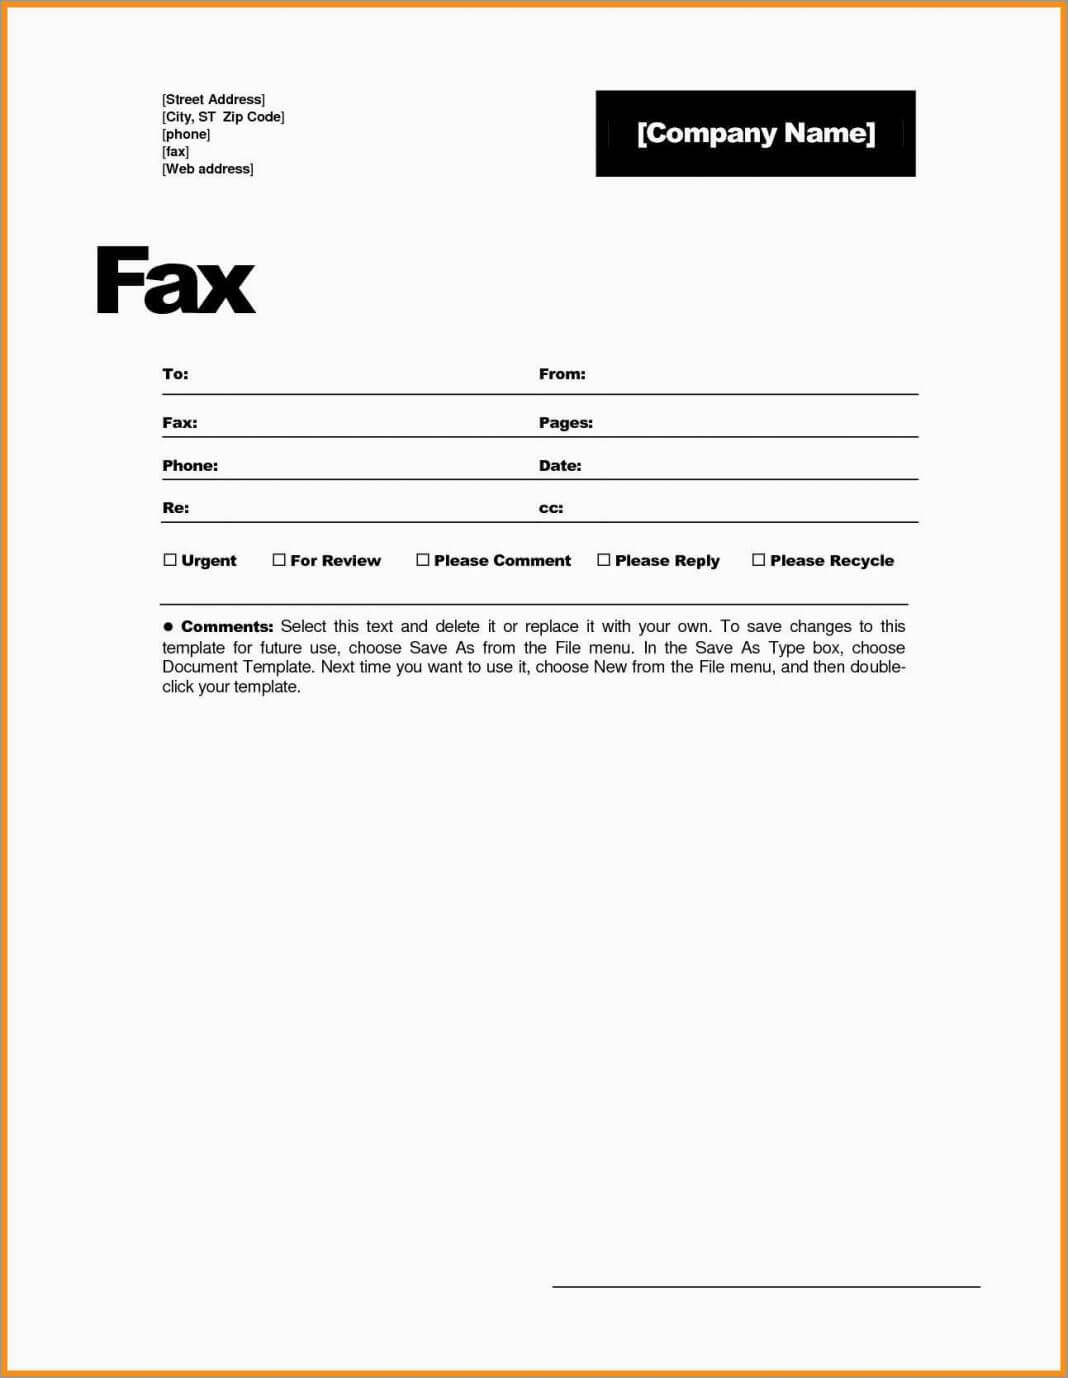 Fax Cover Sheet Plate Word Spreadsheet Examples Page Free In Fax Cover Sheet Template Word 2010